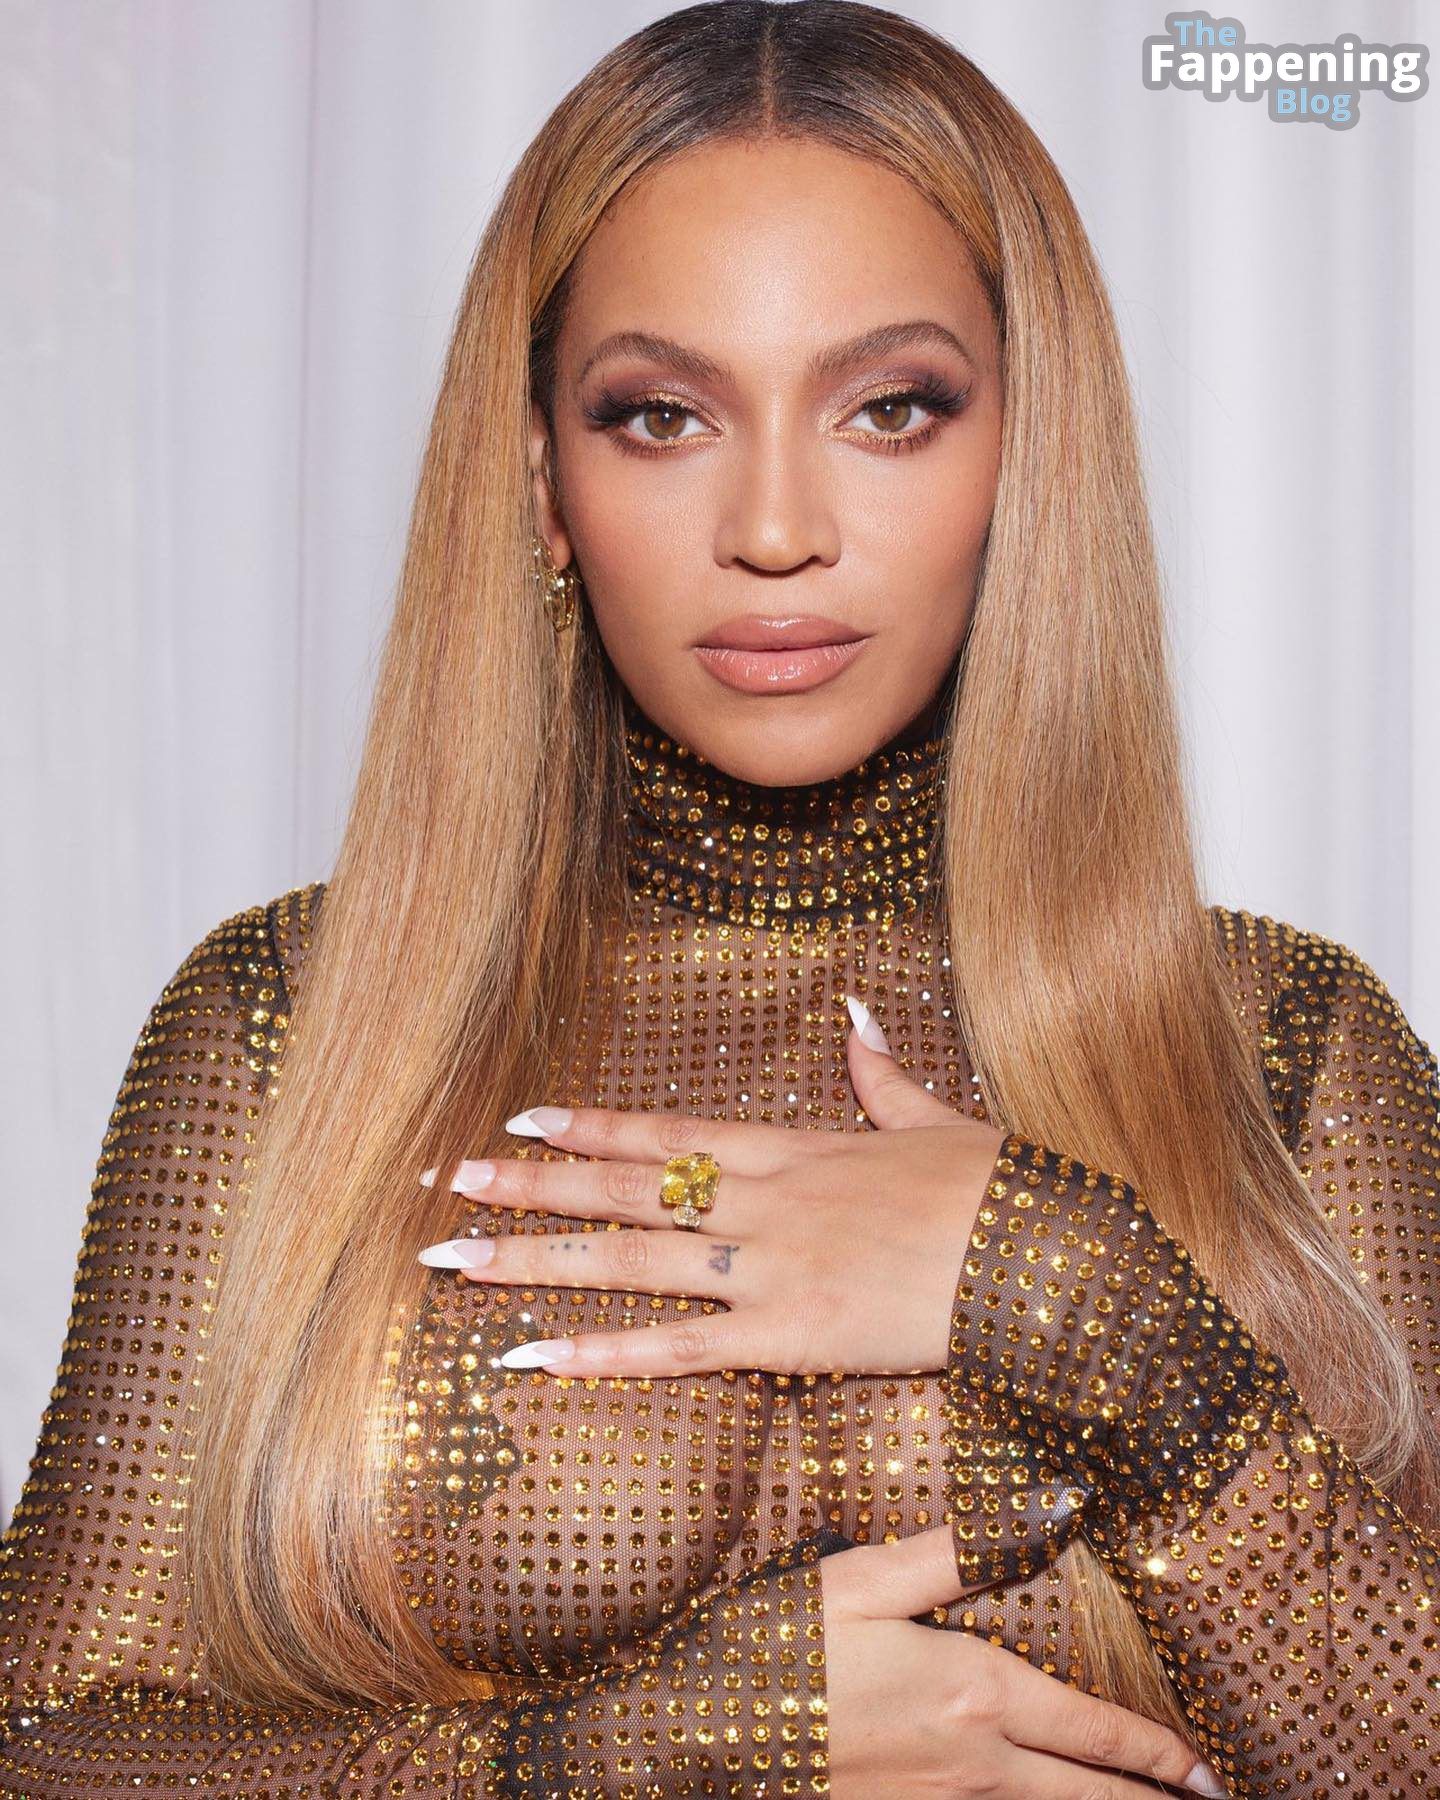 Braless-Beyonce-See-Through-Glamour-5-1-thefappeningblog.com_.jpg